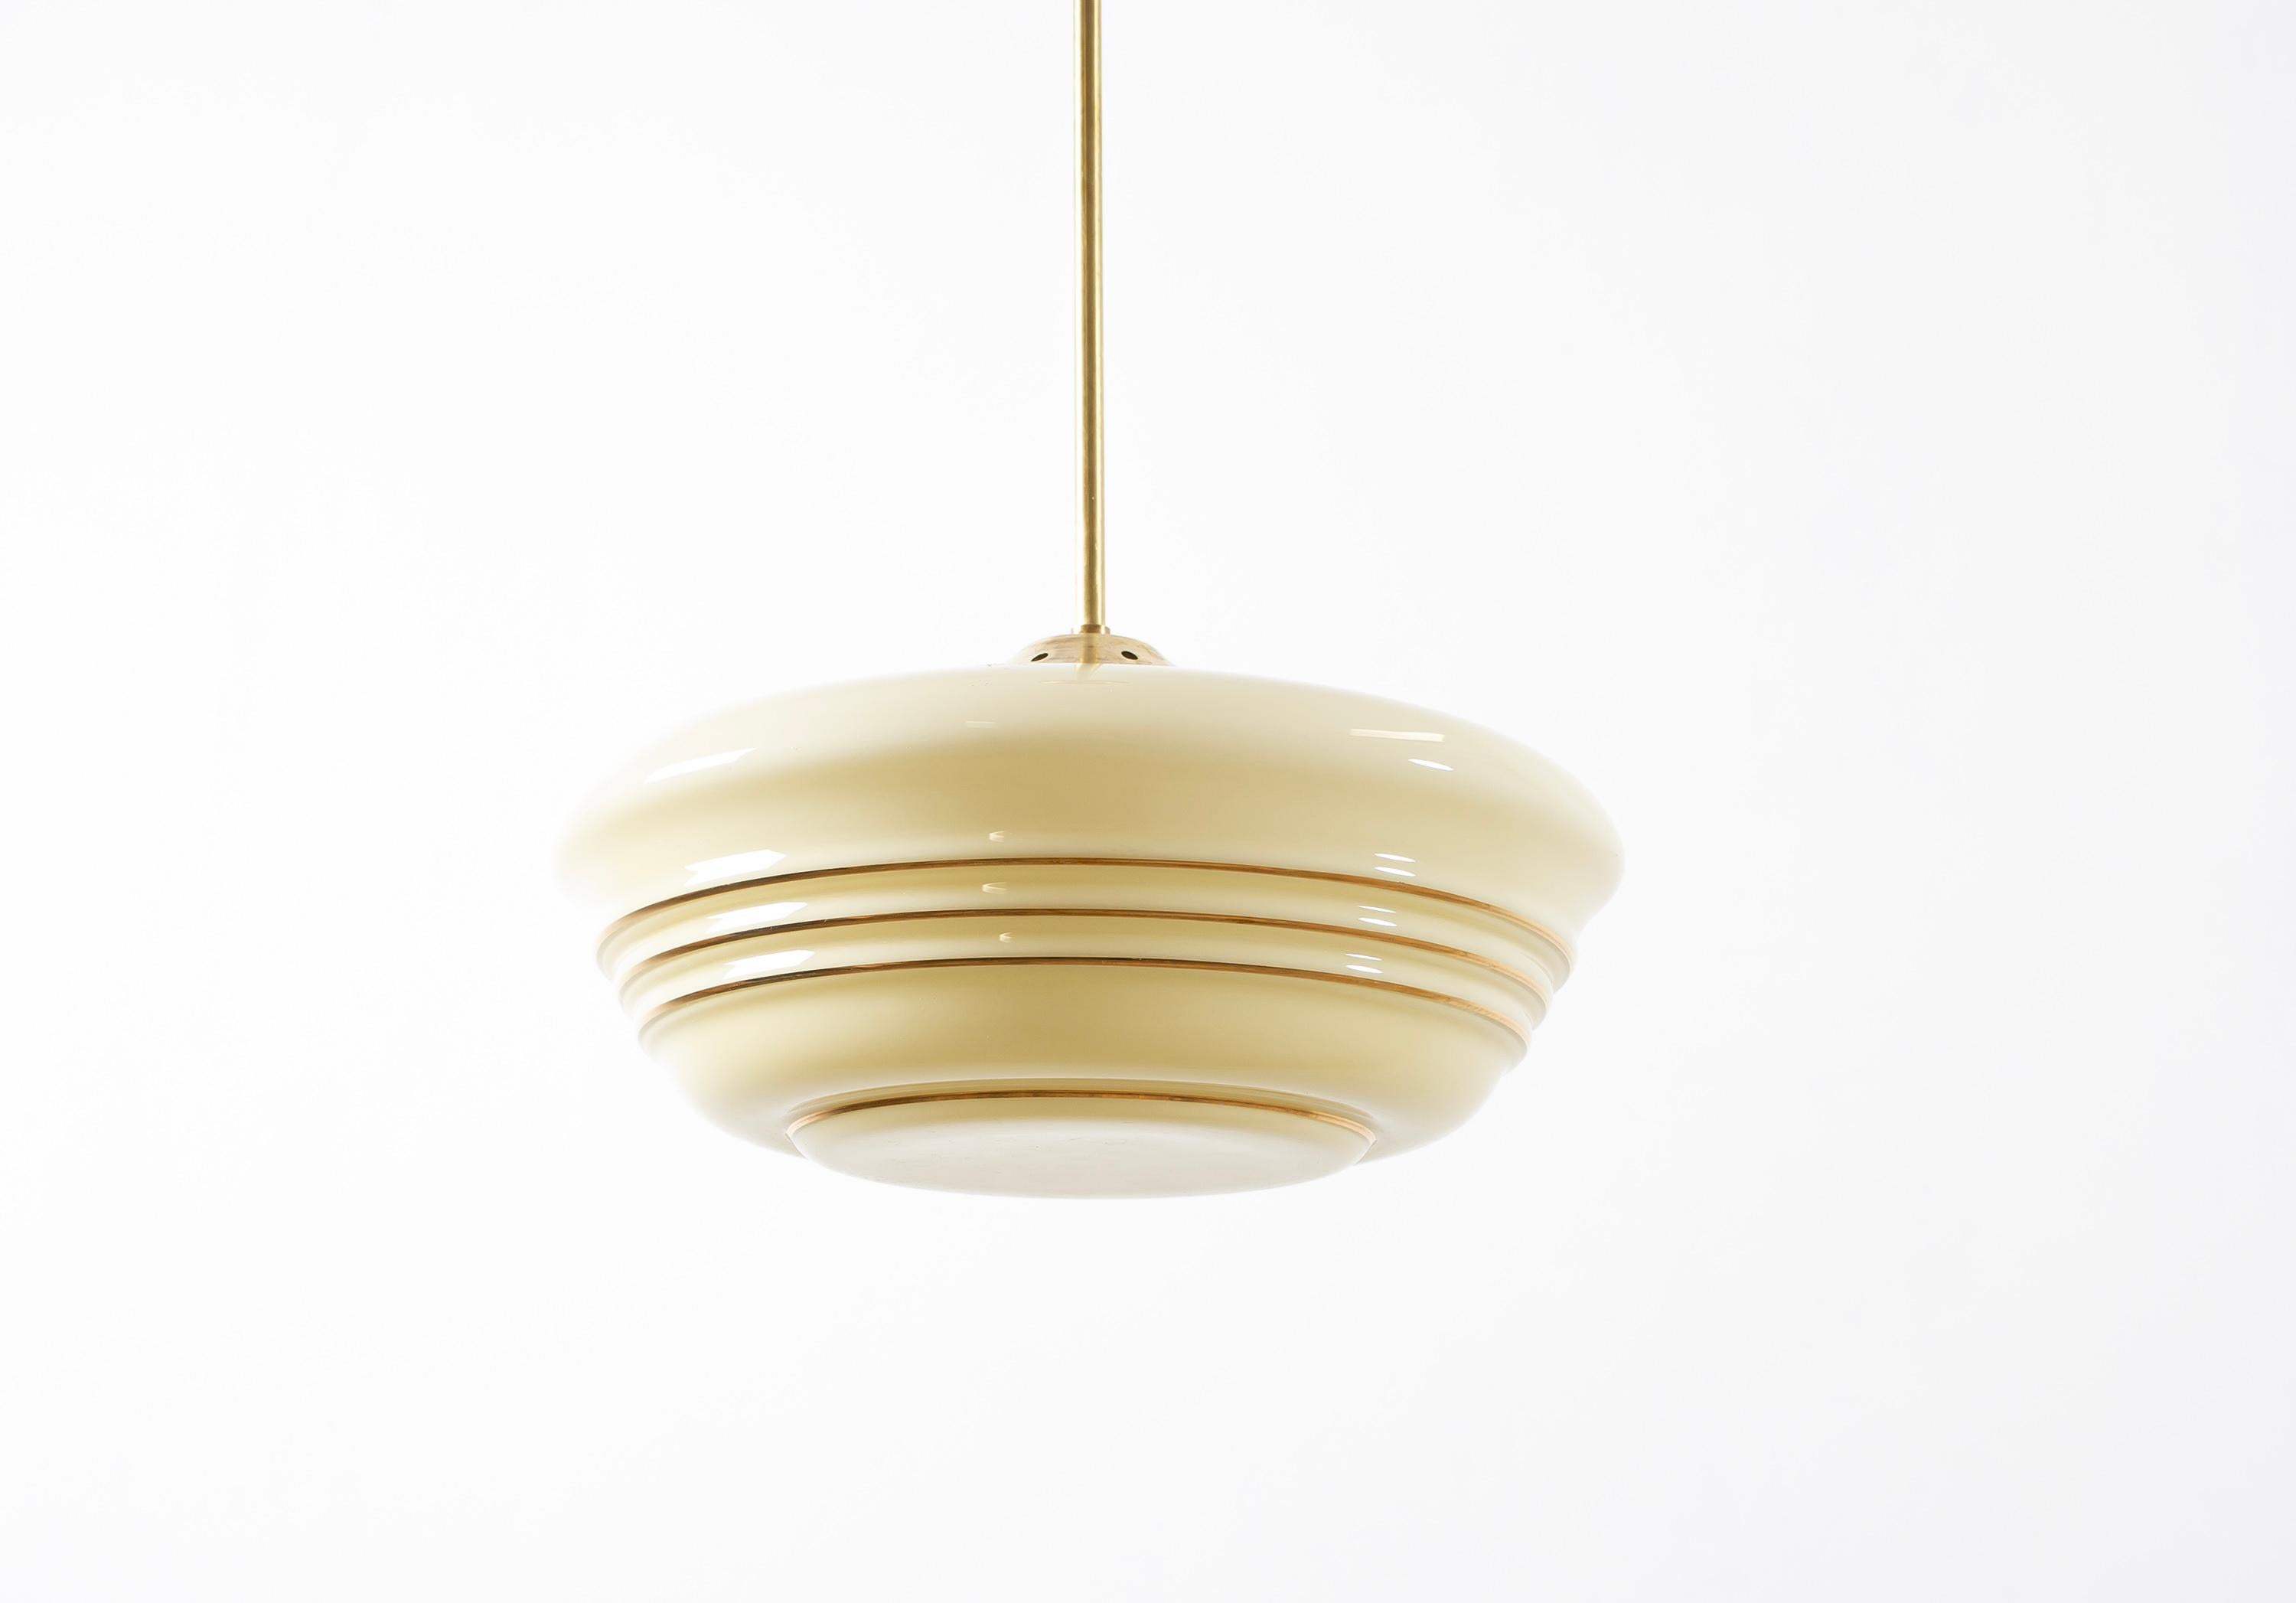 Modernist ceiling light in brass with decorated shade in blown glass. Designed and made in Norway from cirka 1950s second half. The lamp is fully working and in good vintage condition. It is fitted with one E27 bulb holder (works in the US), with a